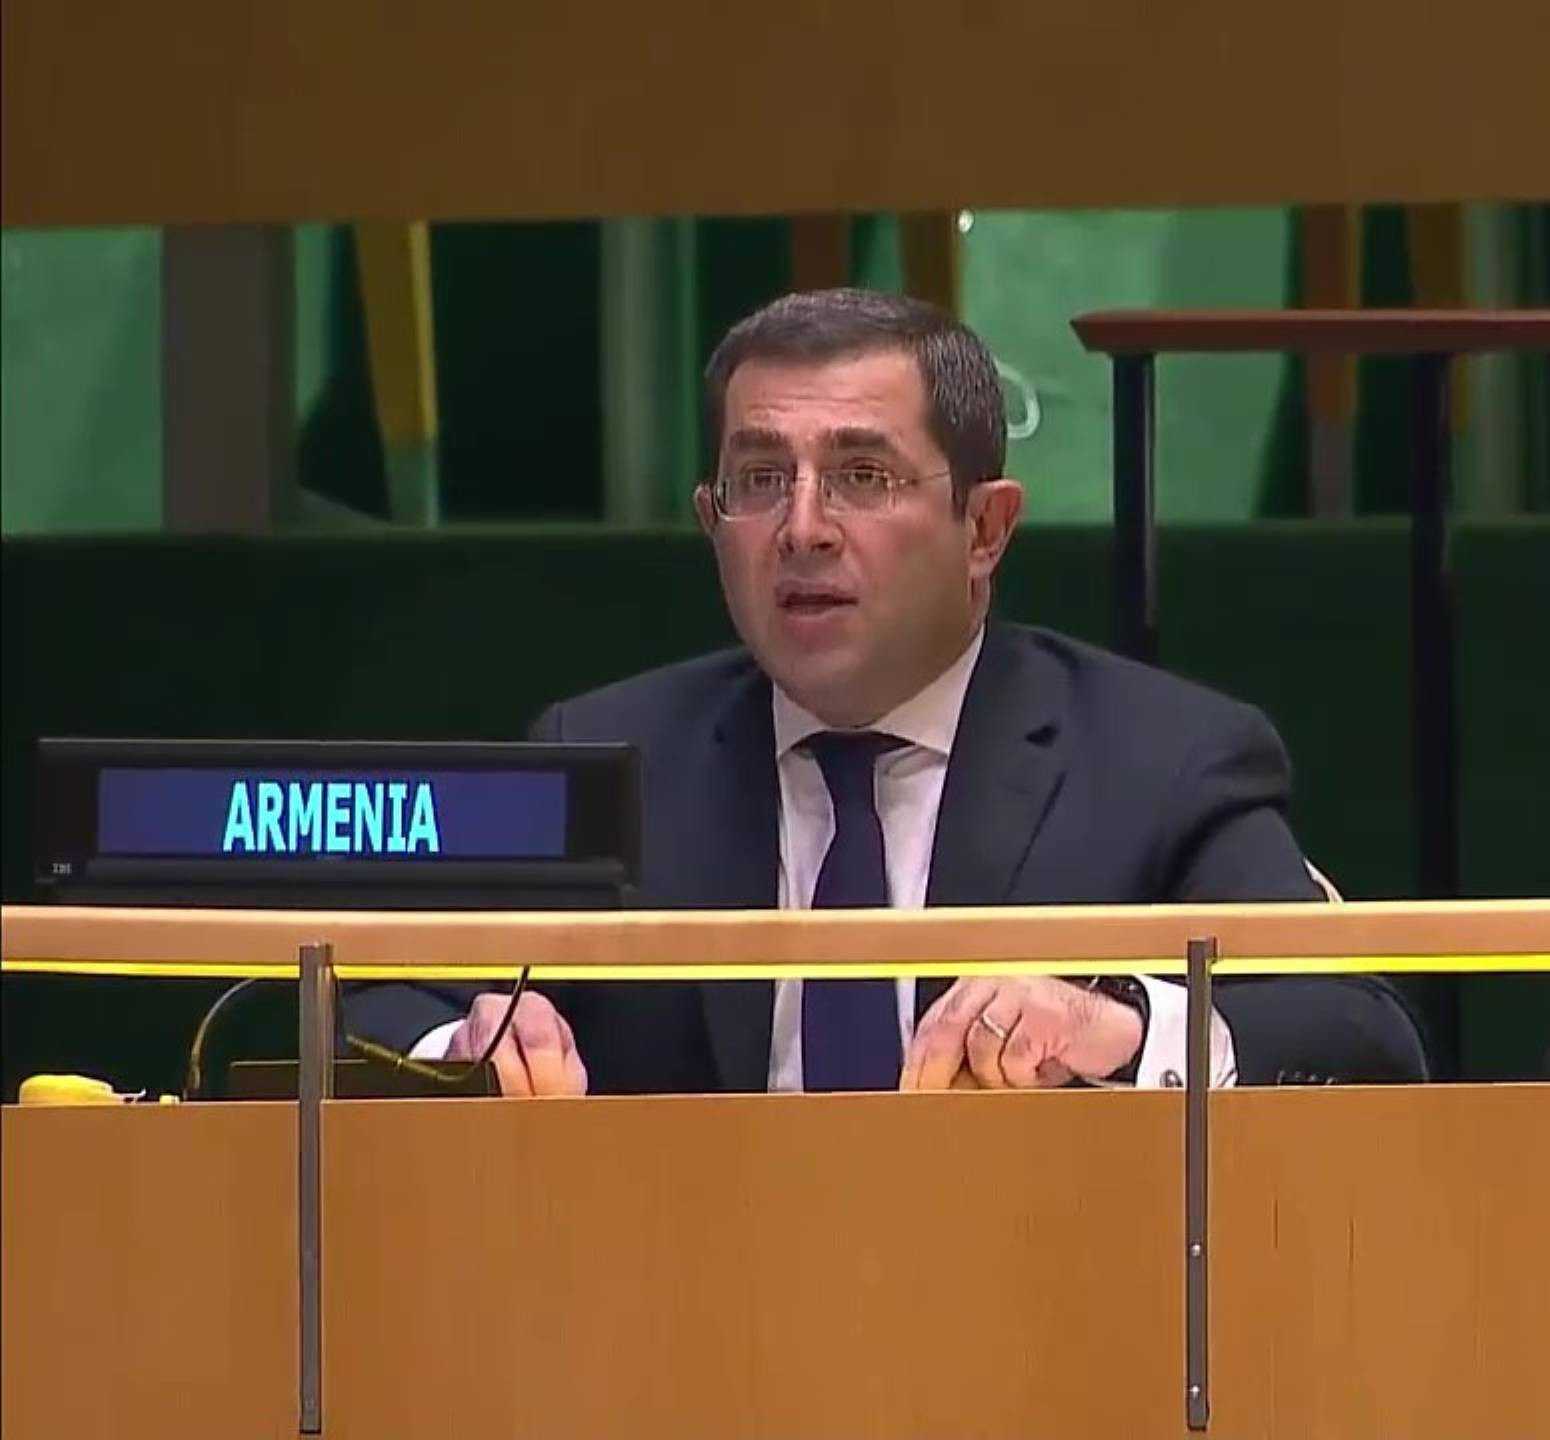 Remarks by the Permanent Representative of Armenia to the UN H.E. Mr. Mher Margaryan in response to the statement of Azerbaijan